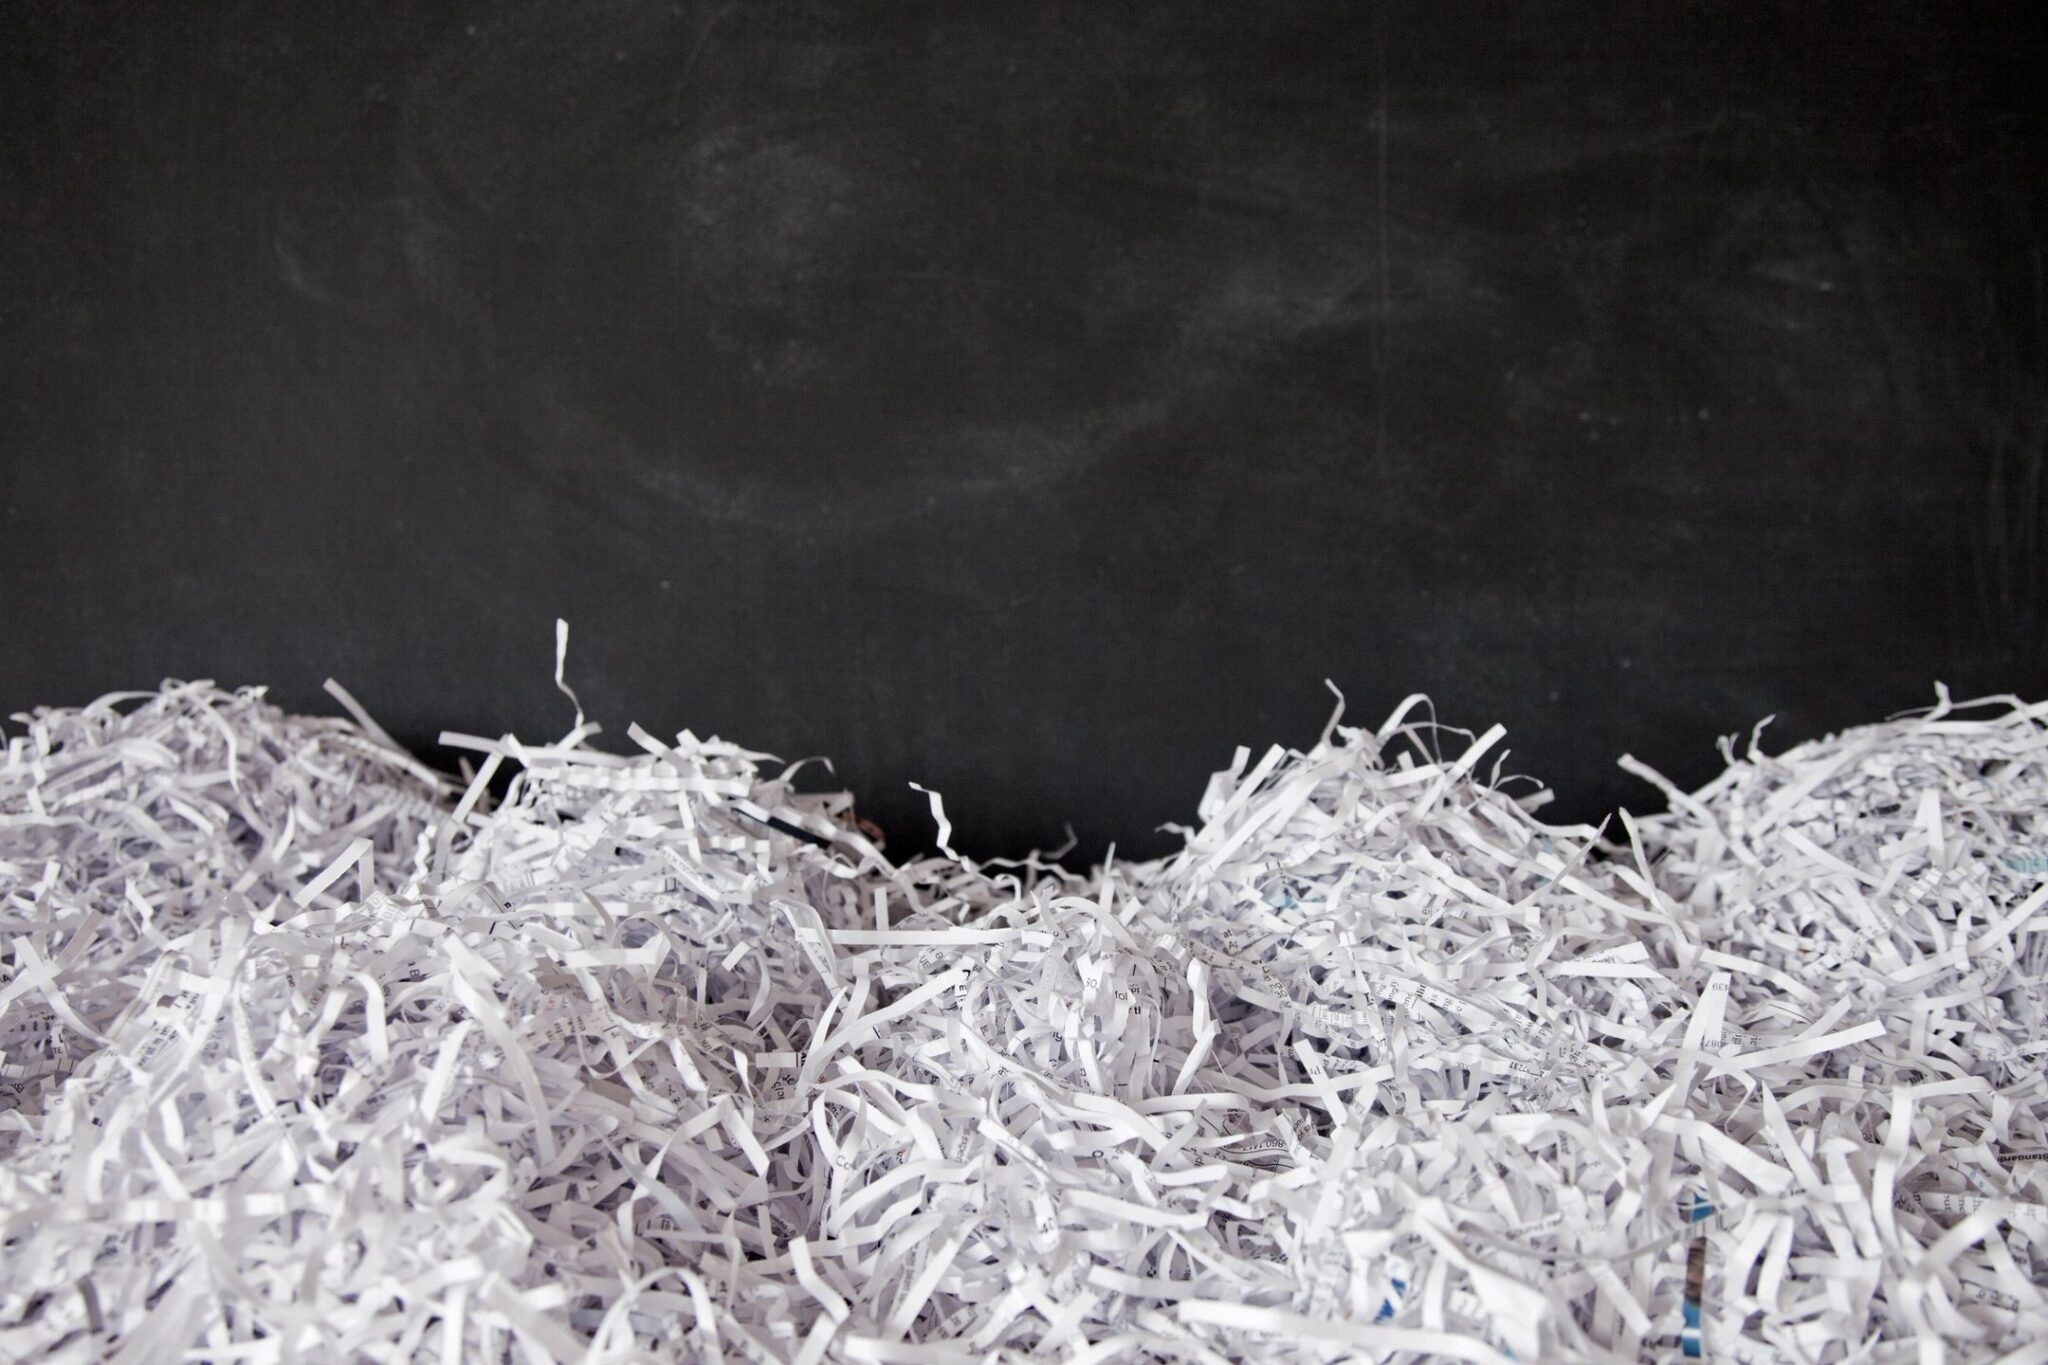 Free Shredding At Armco Credit Union In Cranberry